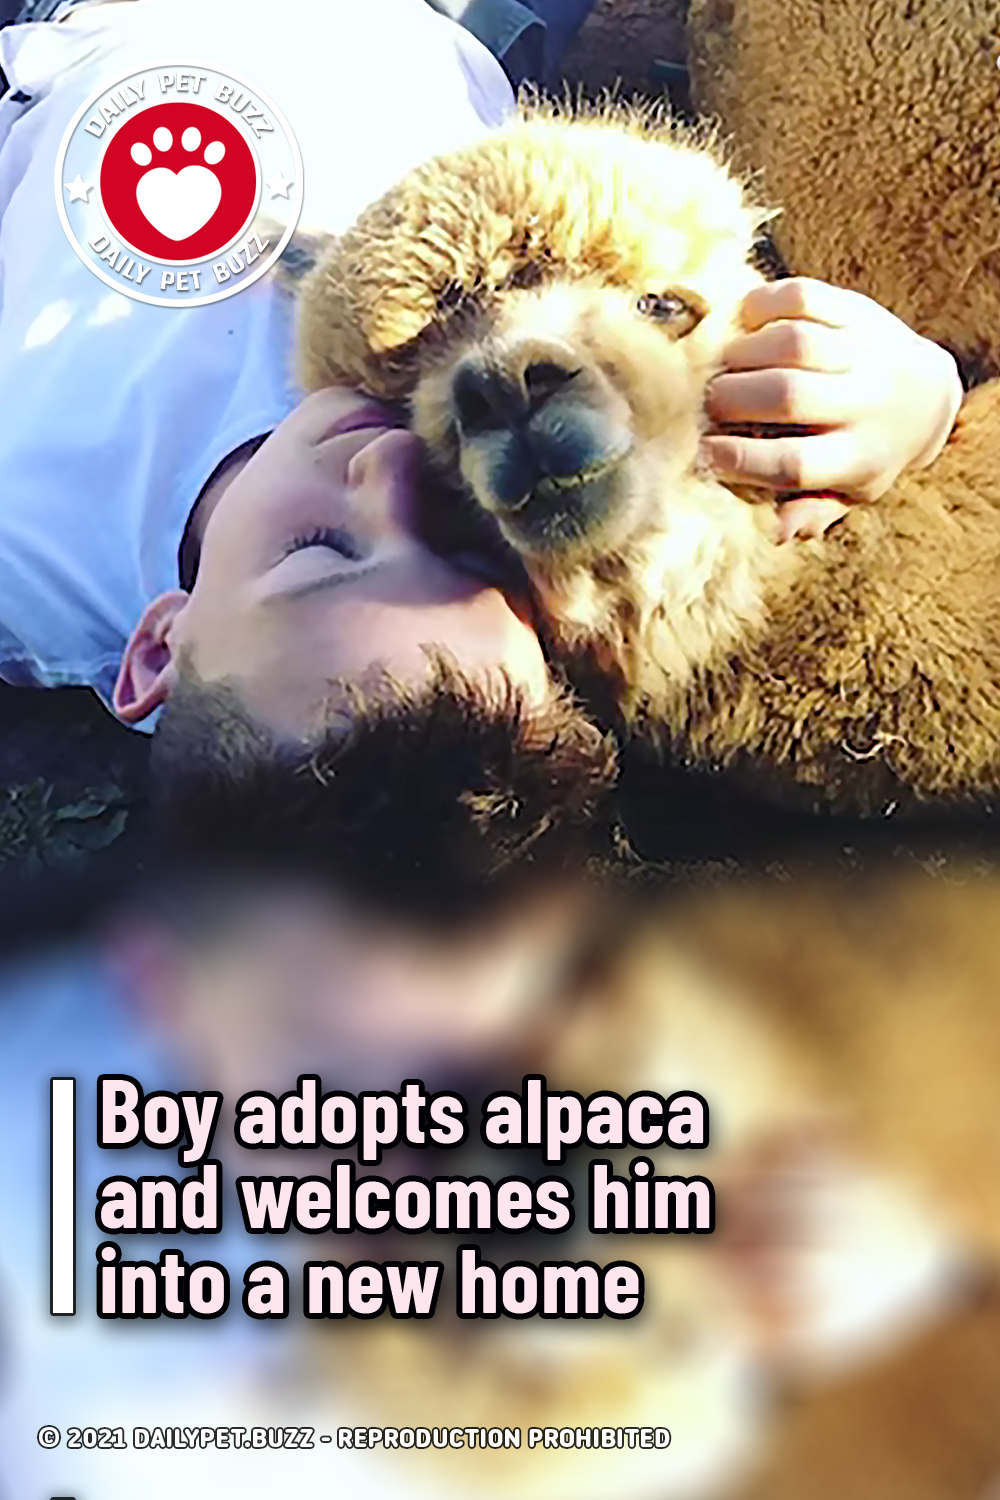 Boy adopts alpaca and welcomes him into a new home